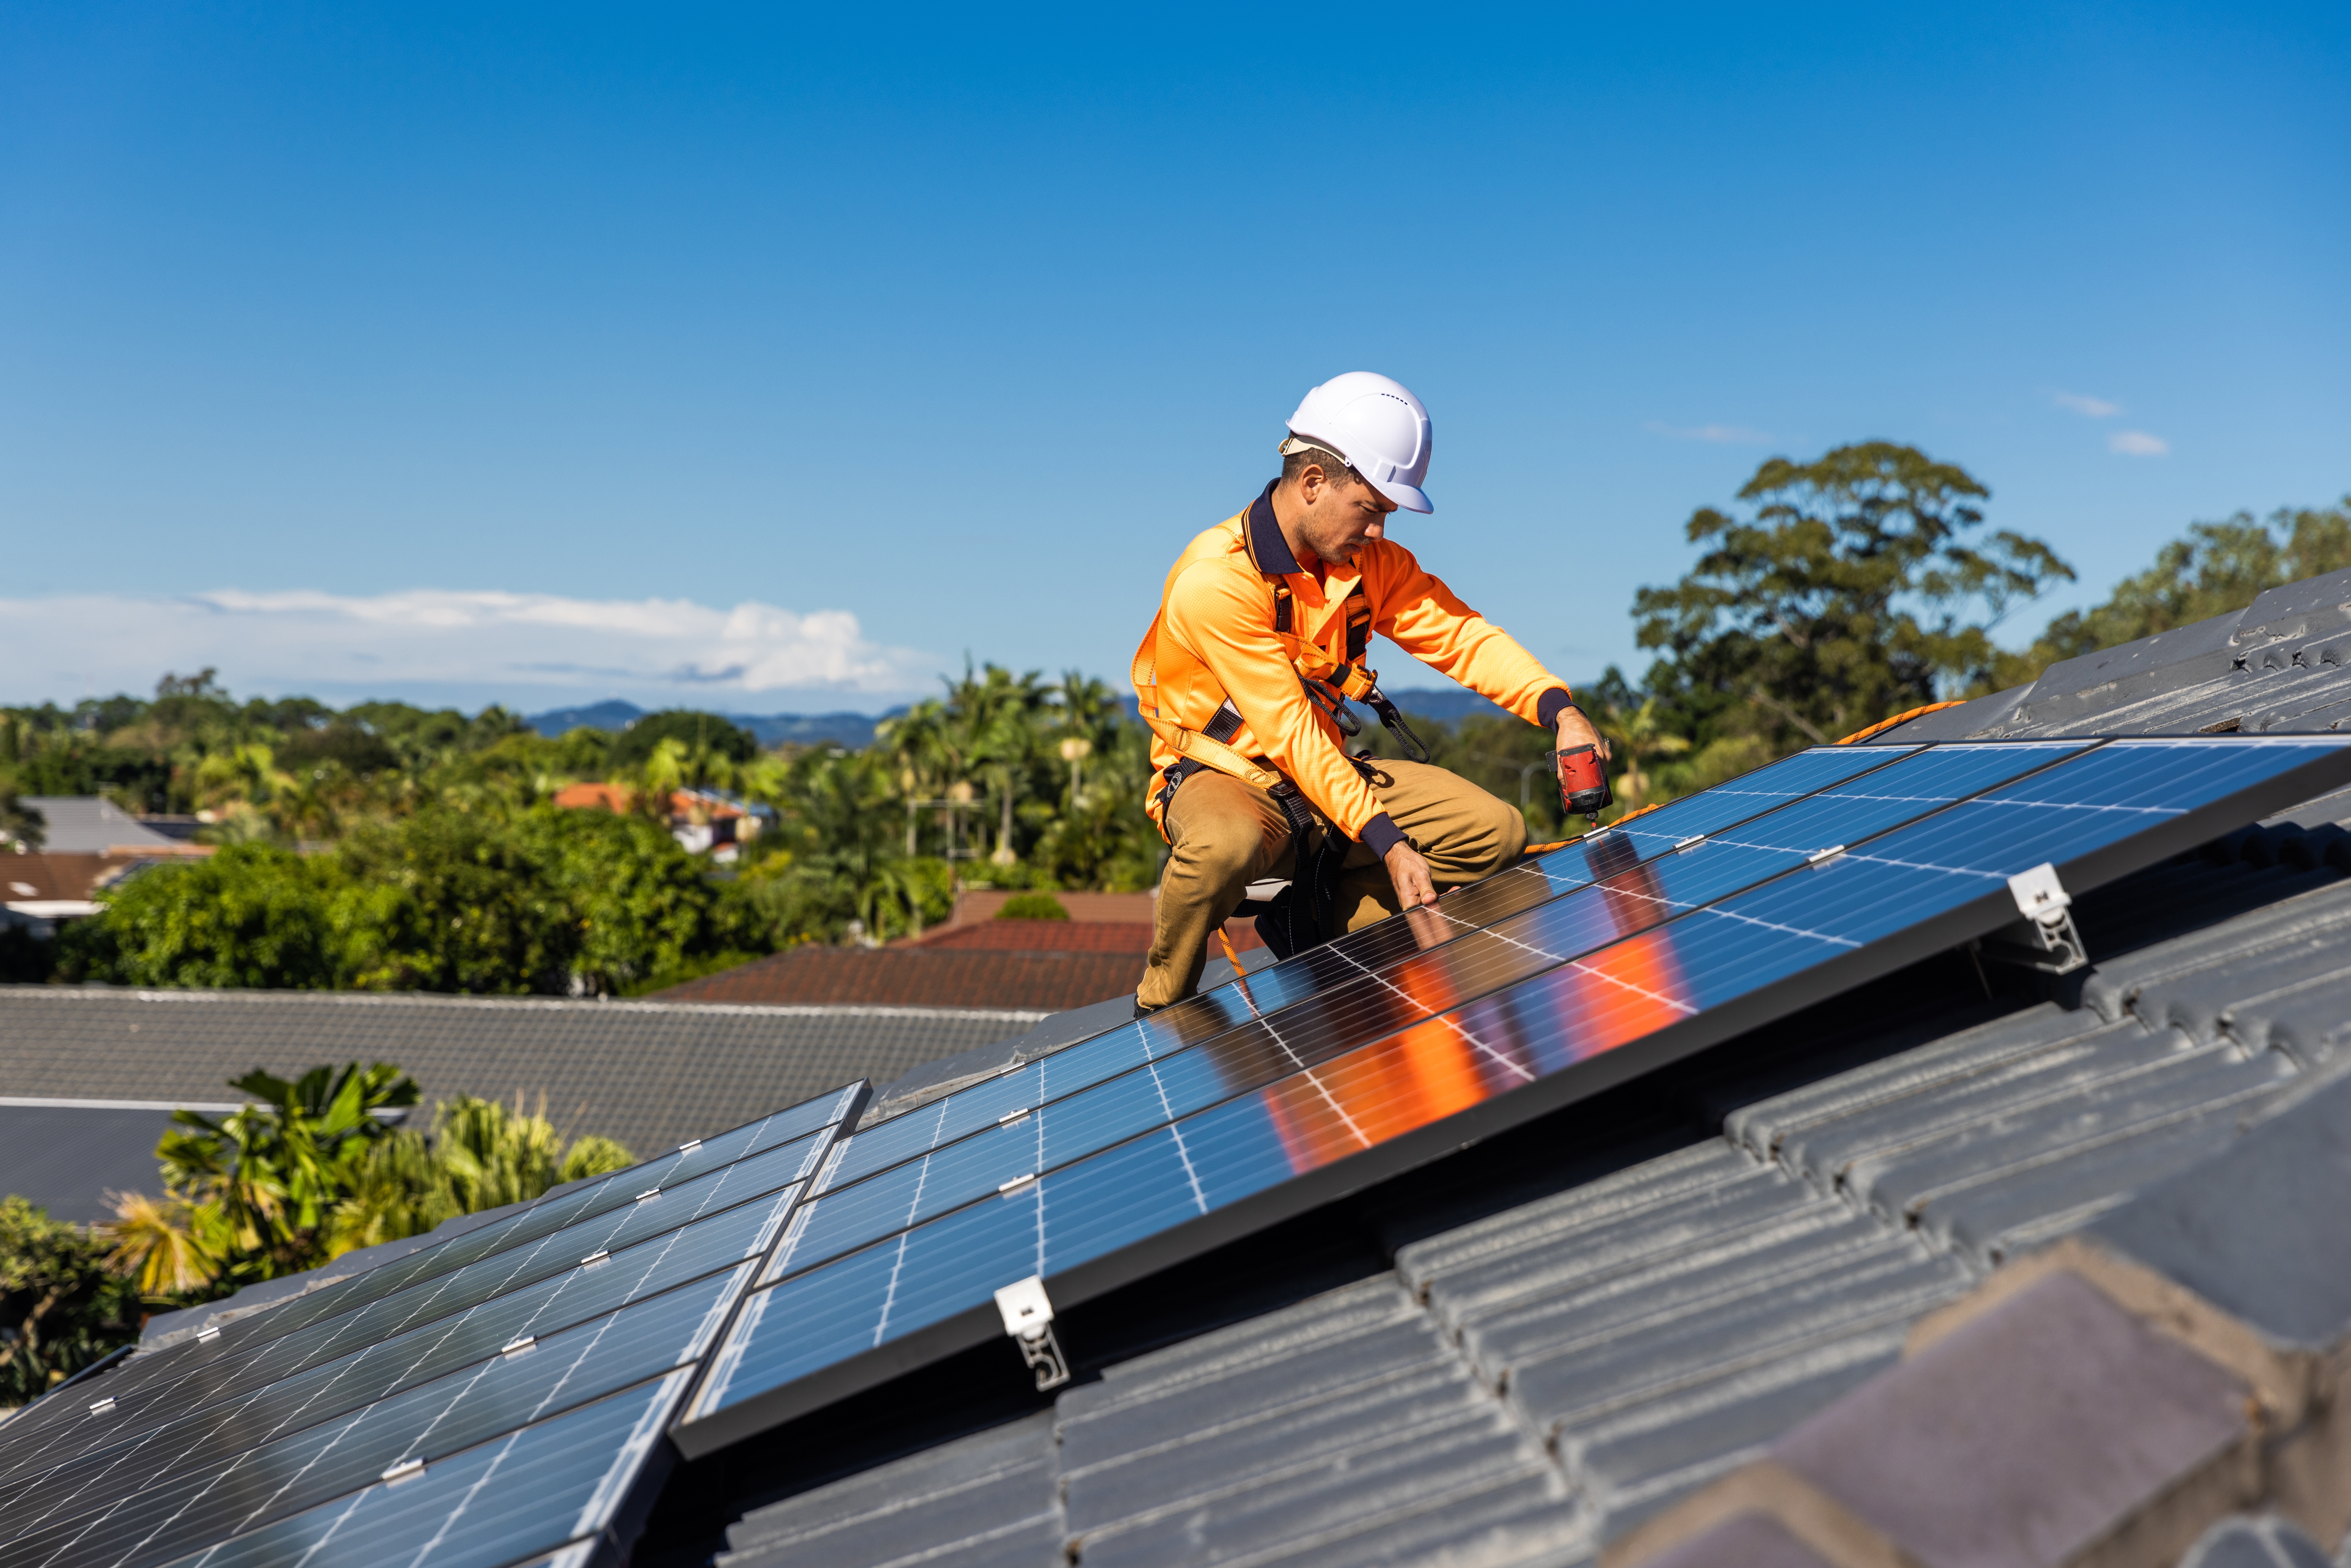 Selling a House With Solar Panels: Do I Need To Do Anything Differently?